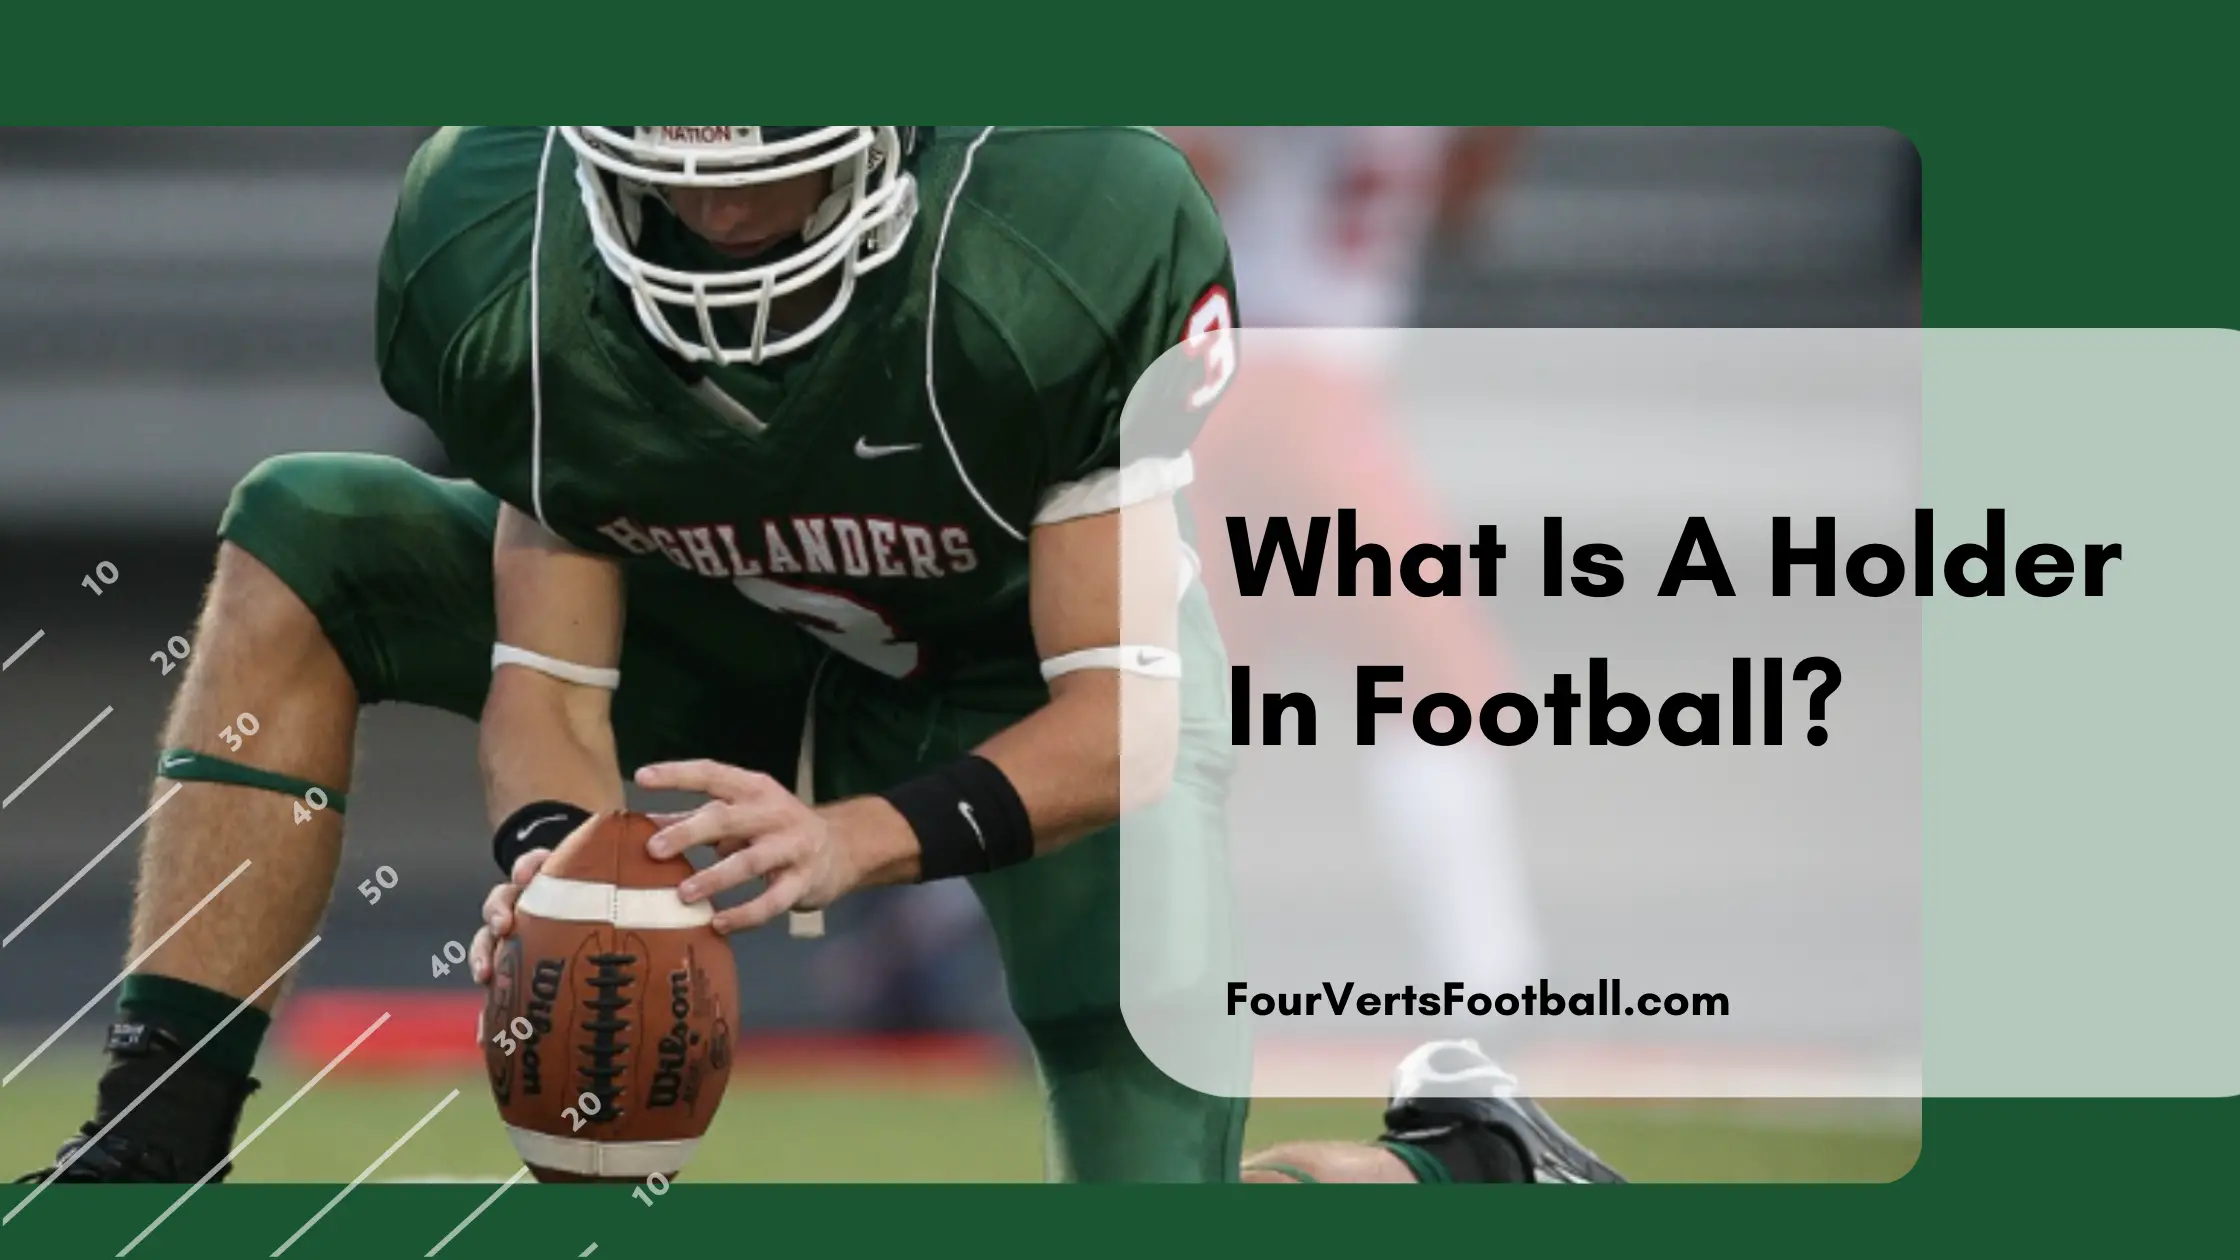 What Is A Holder In Football?